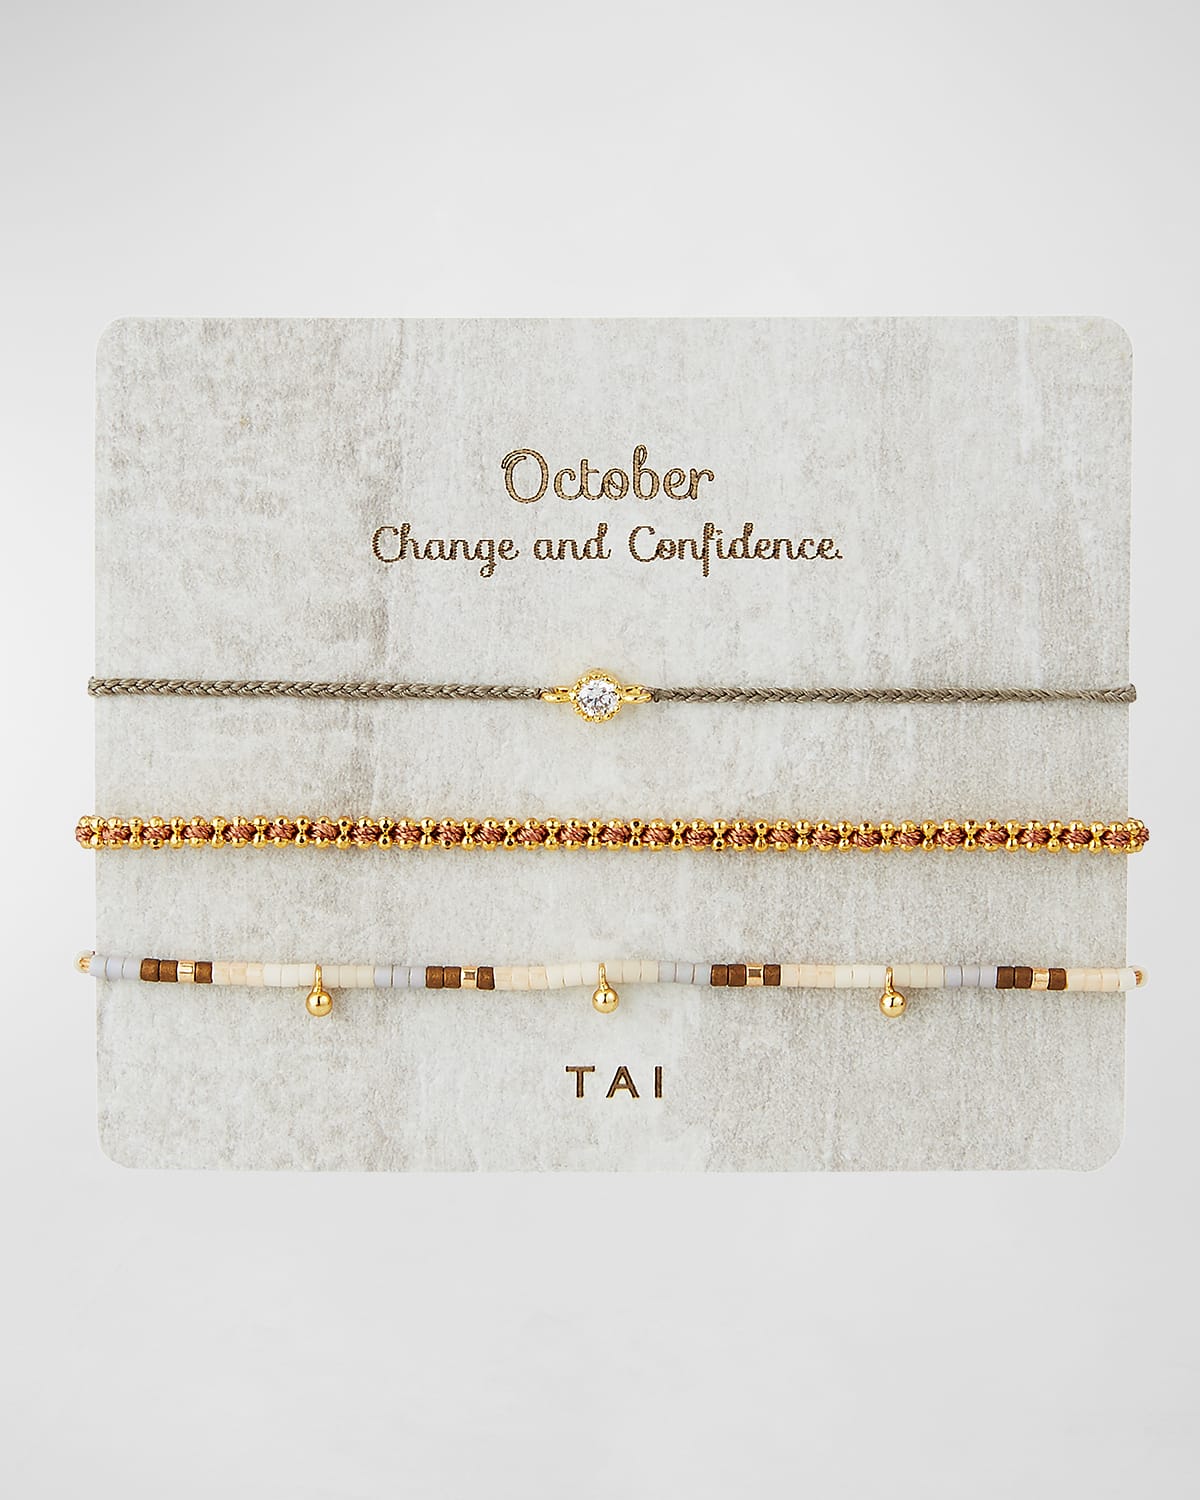 Tai Personalized Birthday Bracelets, Set Of 3 In October